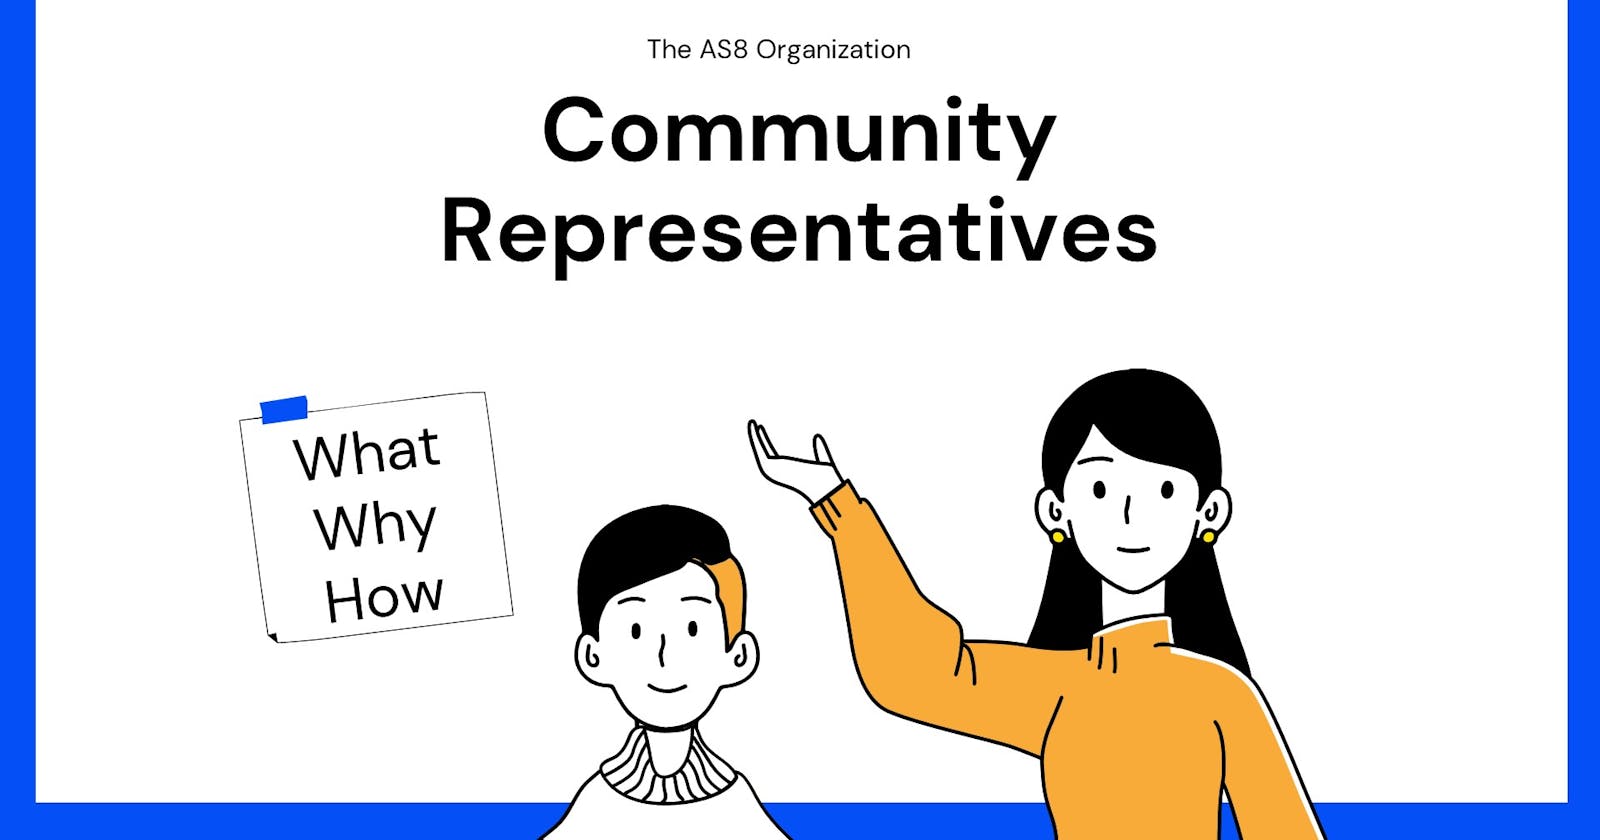 AS8 Organization's Community Representative Project
what, why, and how?